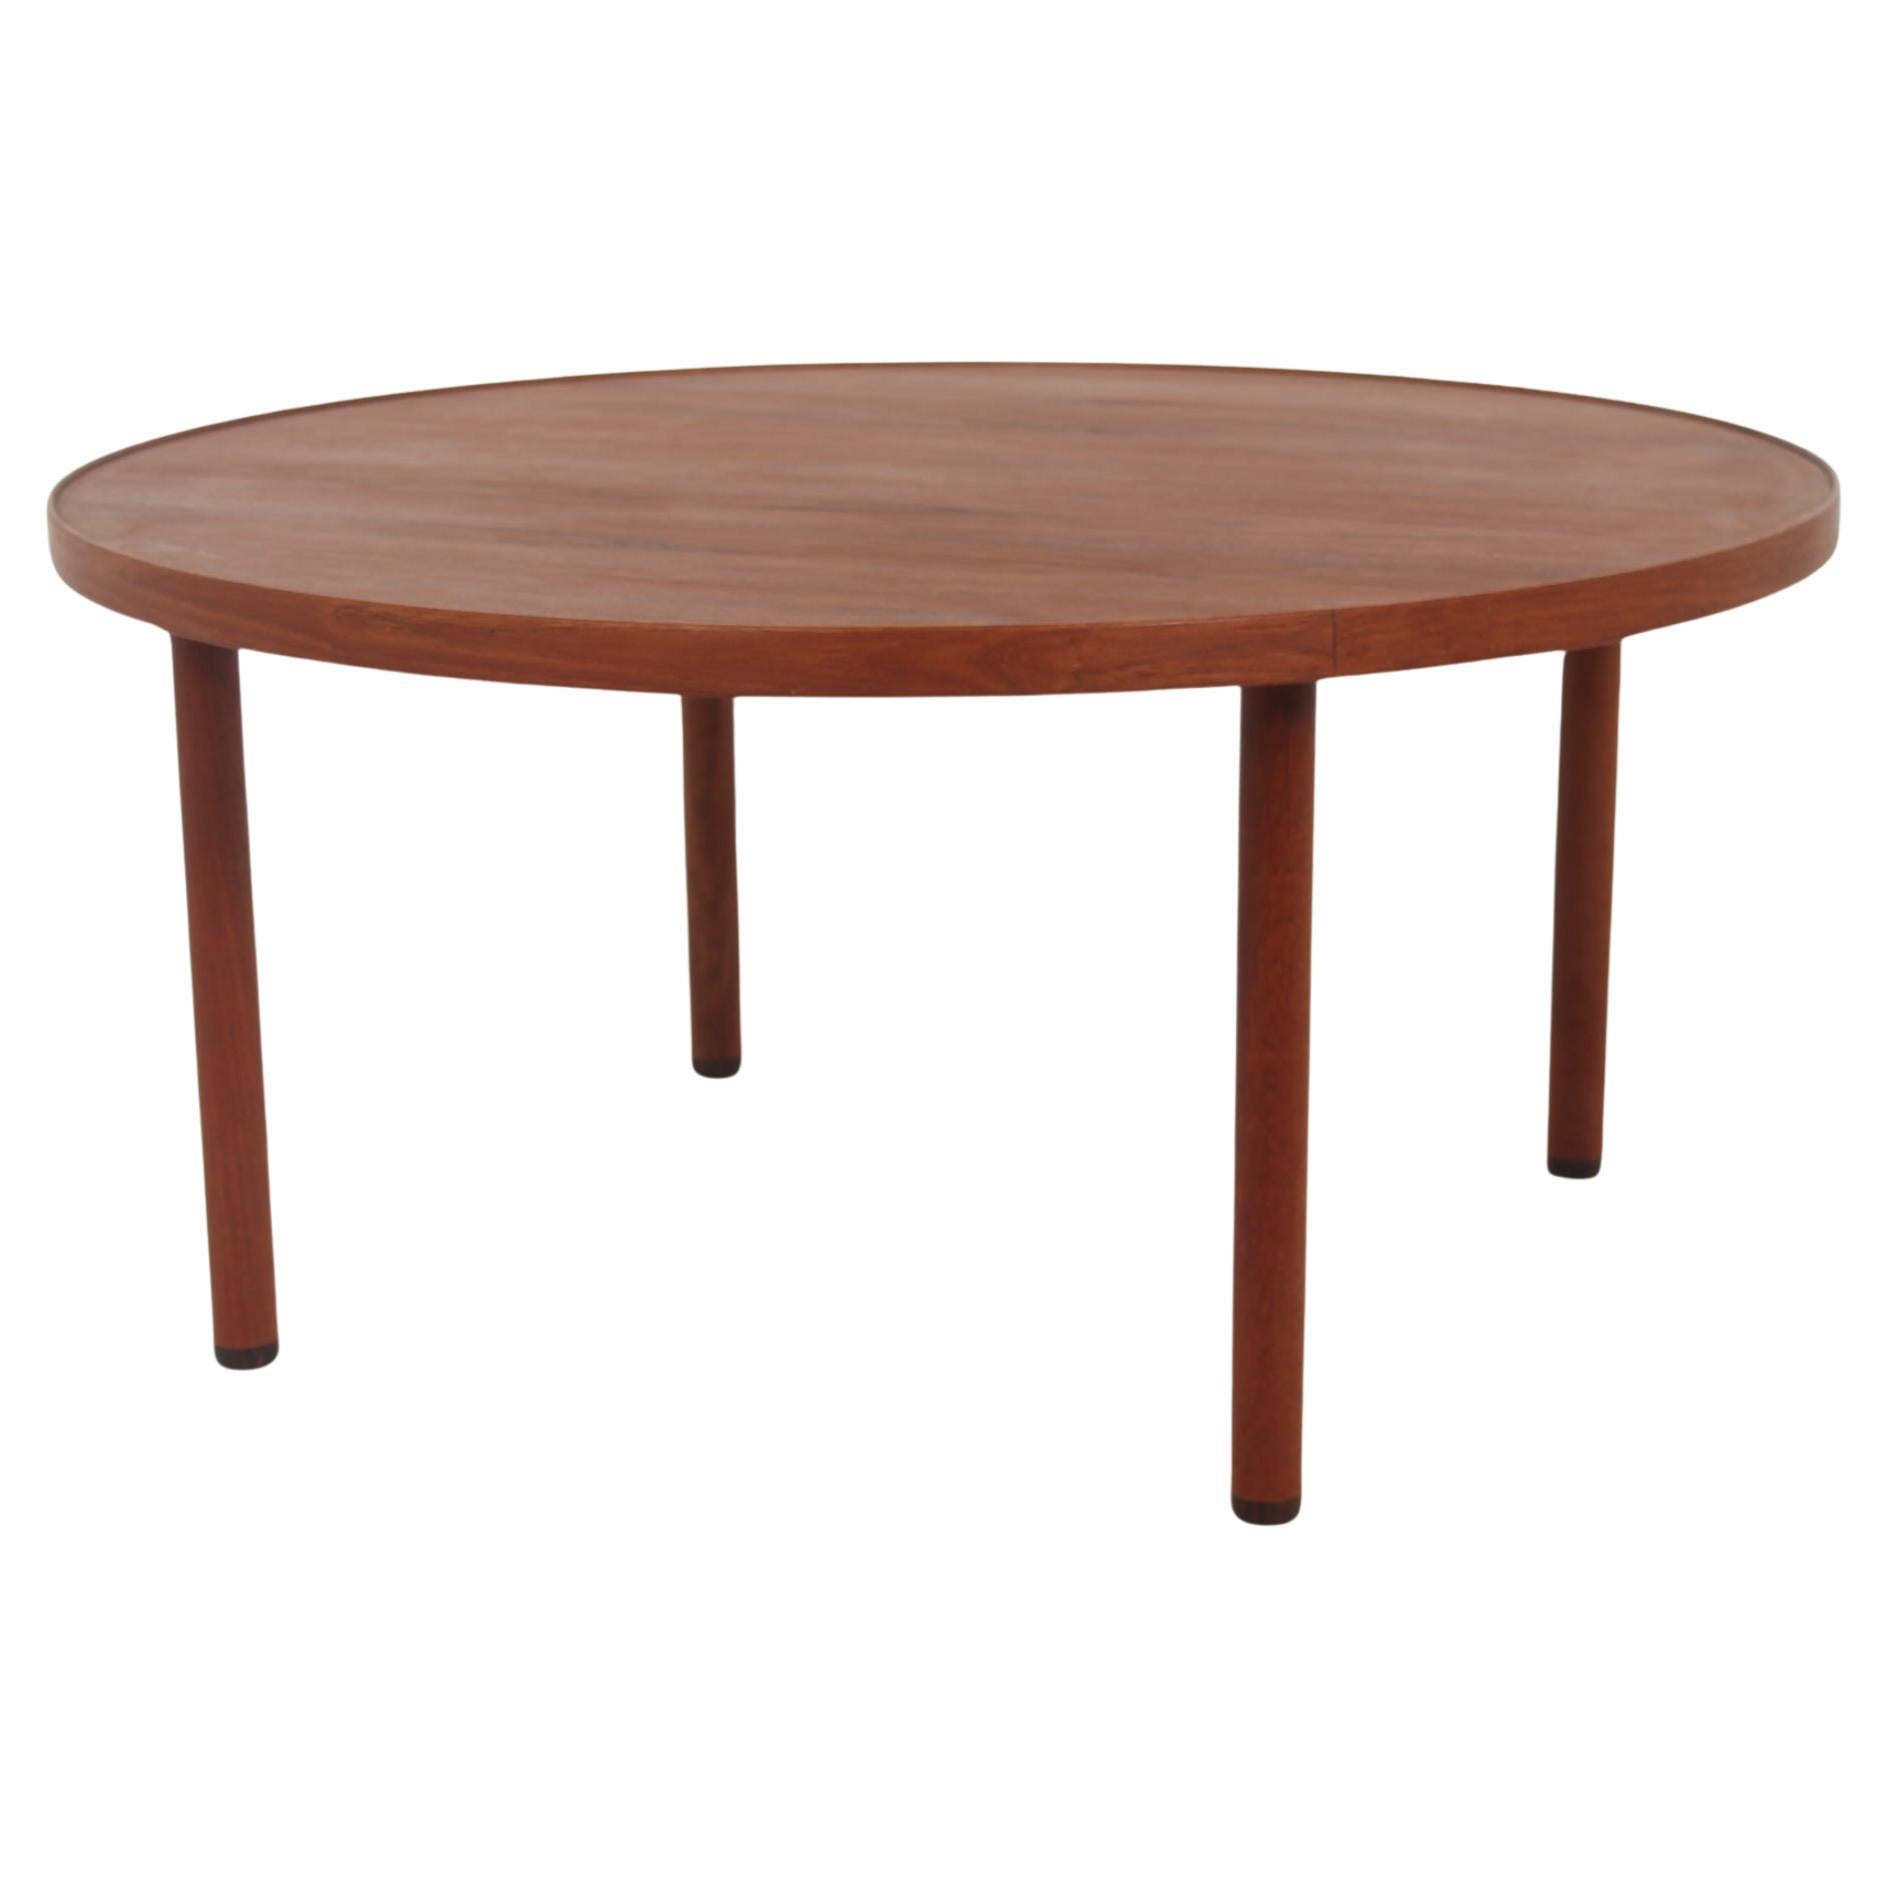 Original coffee table. Designed in the 1950s by E. Larsen and A. Bender Madsen.